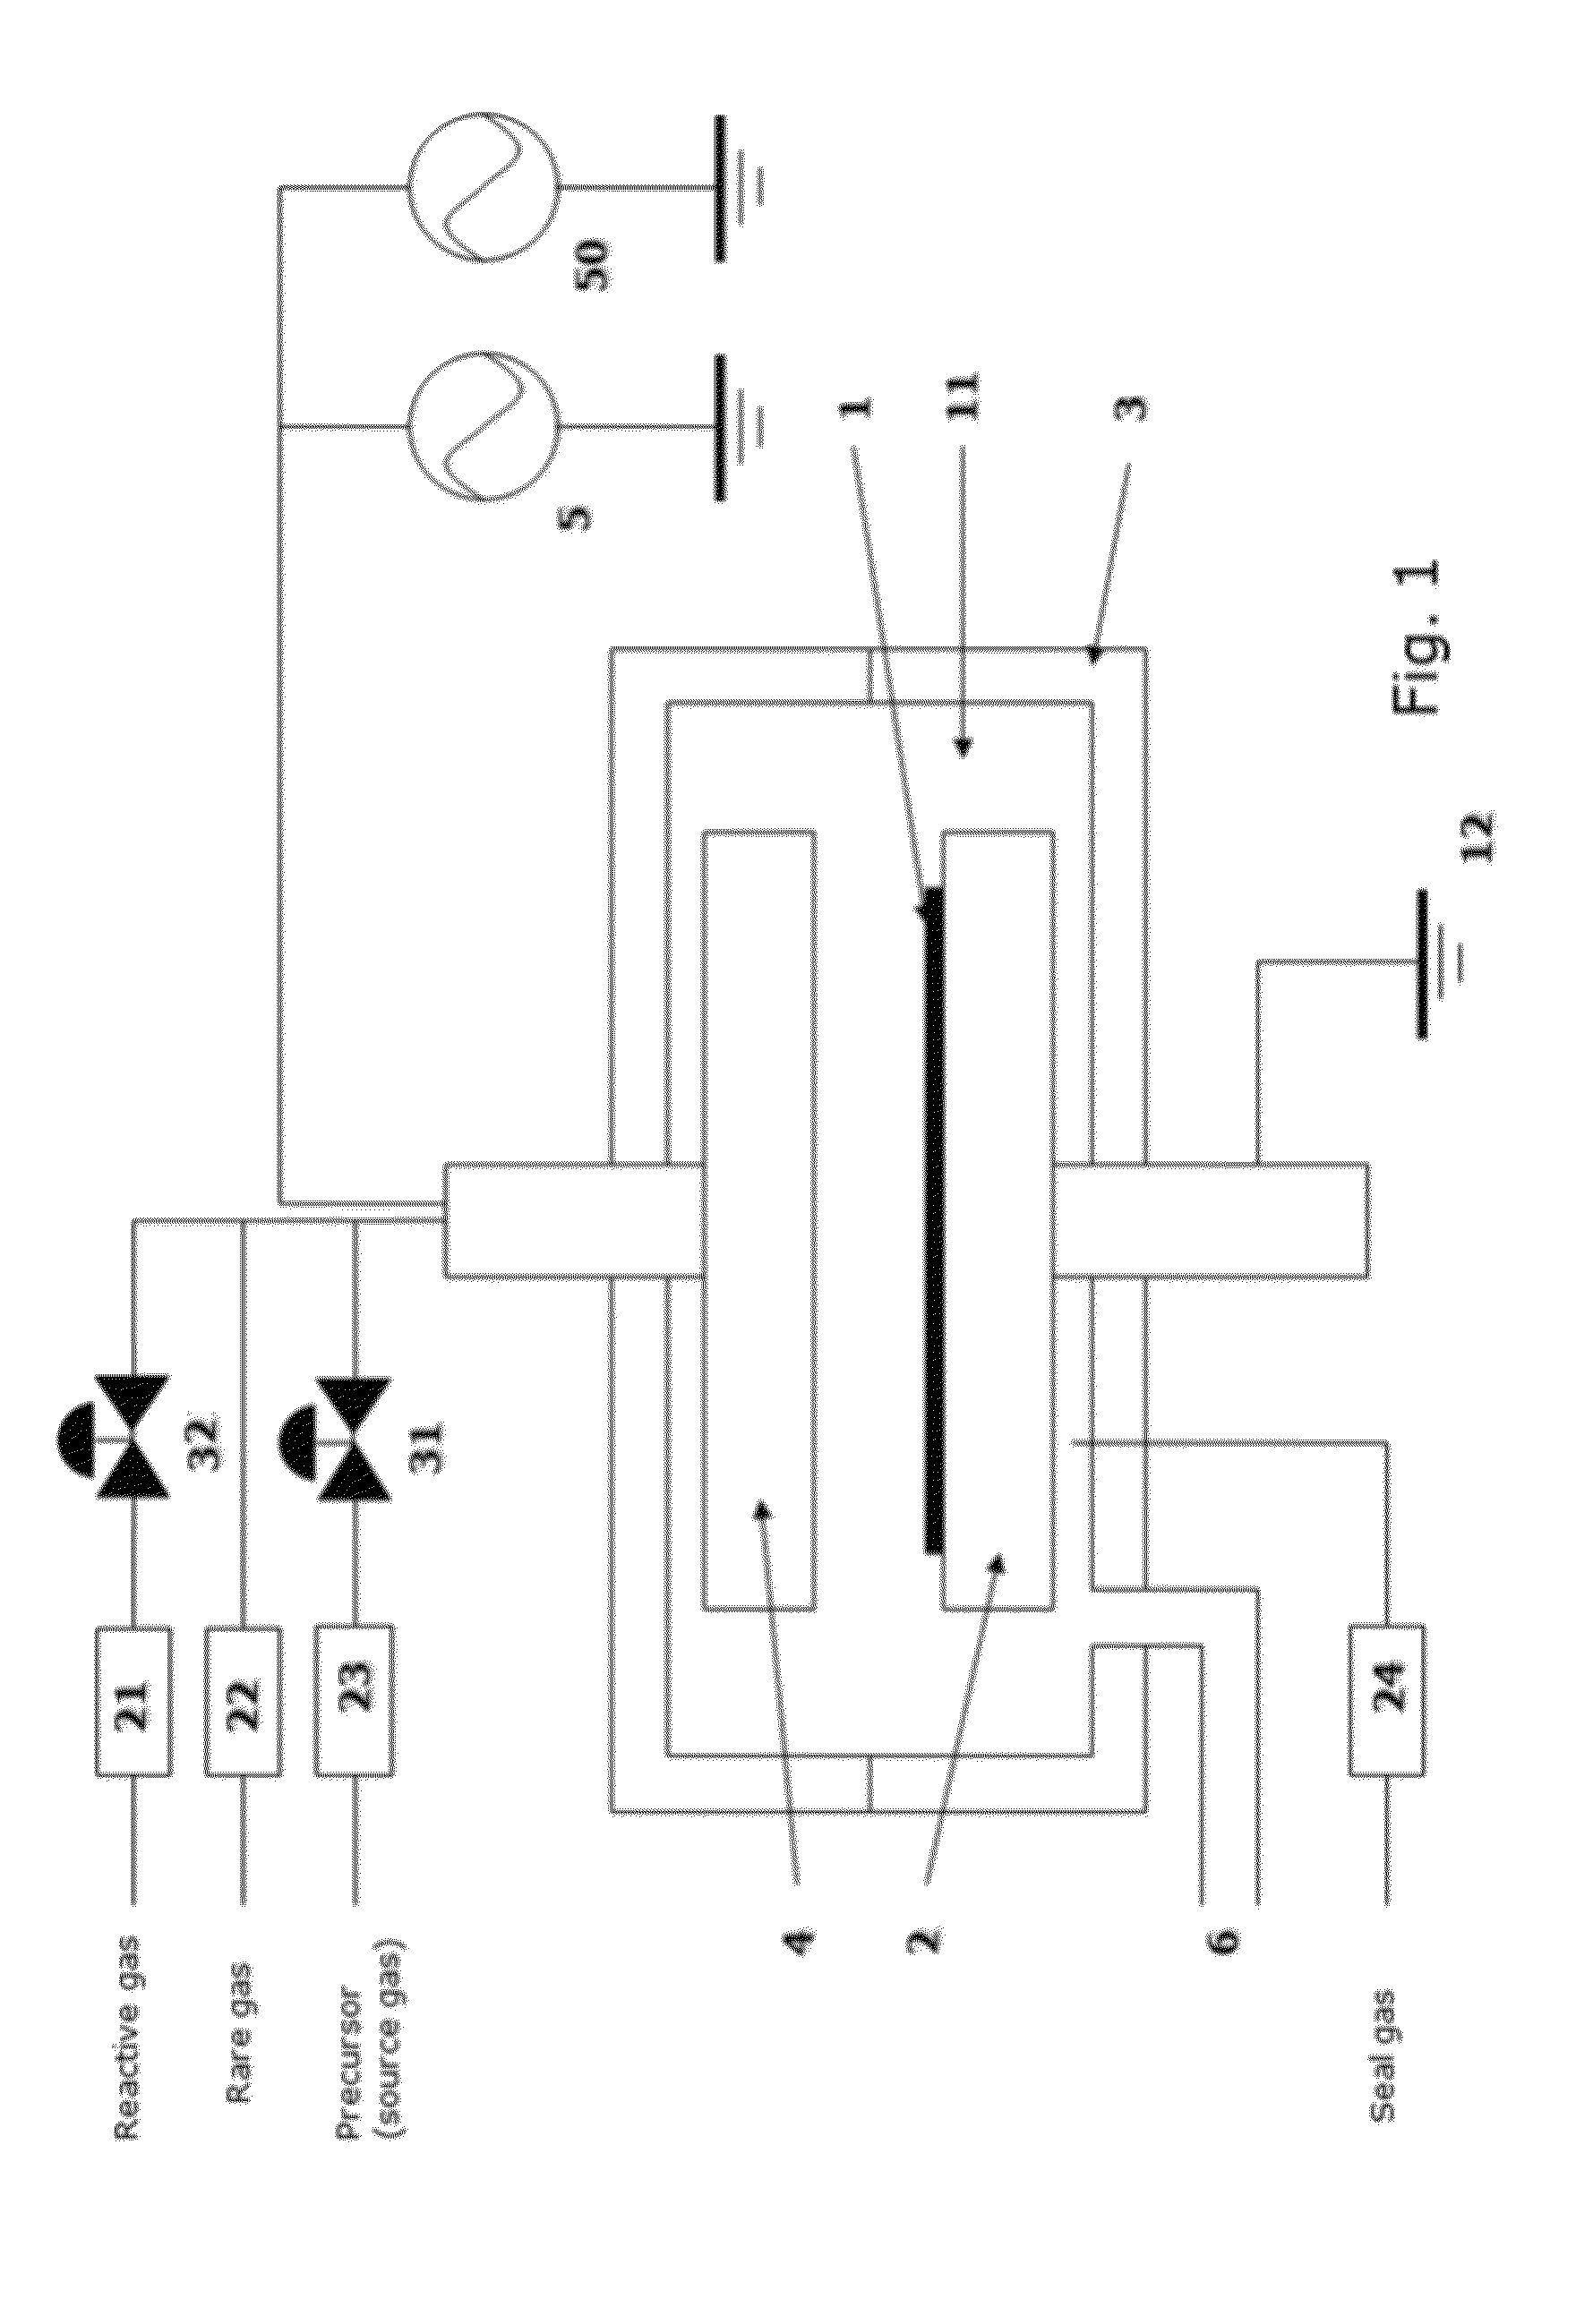 Method of Depositing Dielectric Film by ALD Using Precursor Containing Silicon, Hydrocarbon, and Halogen